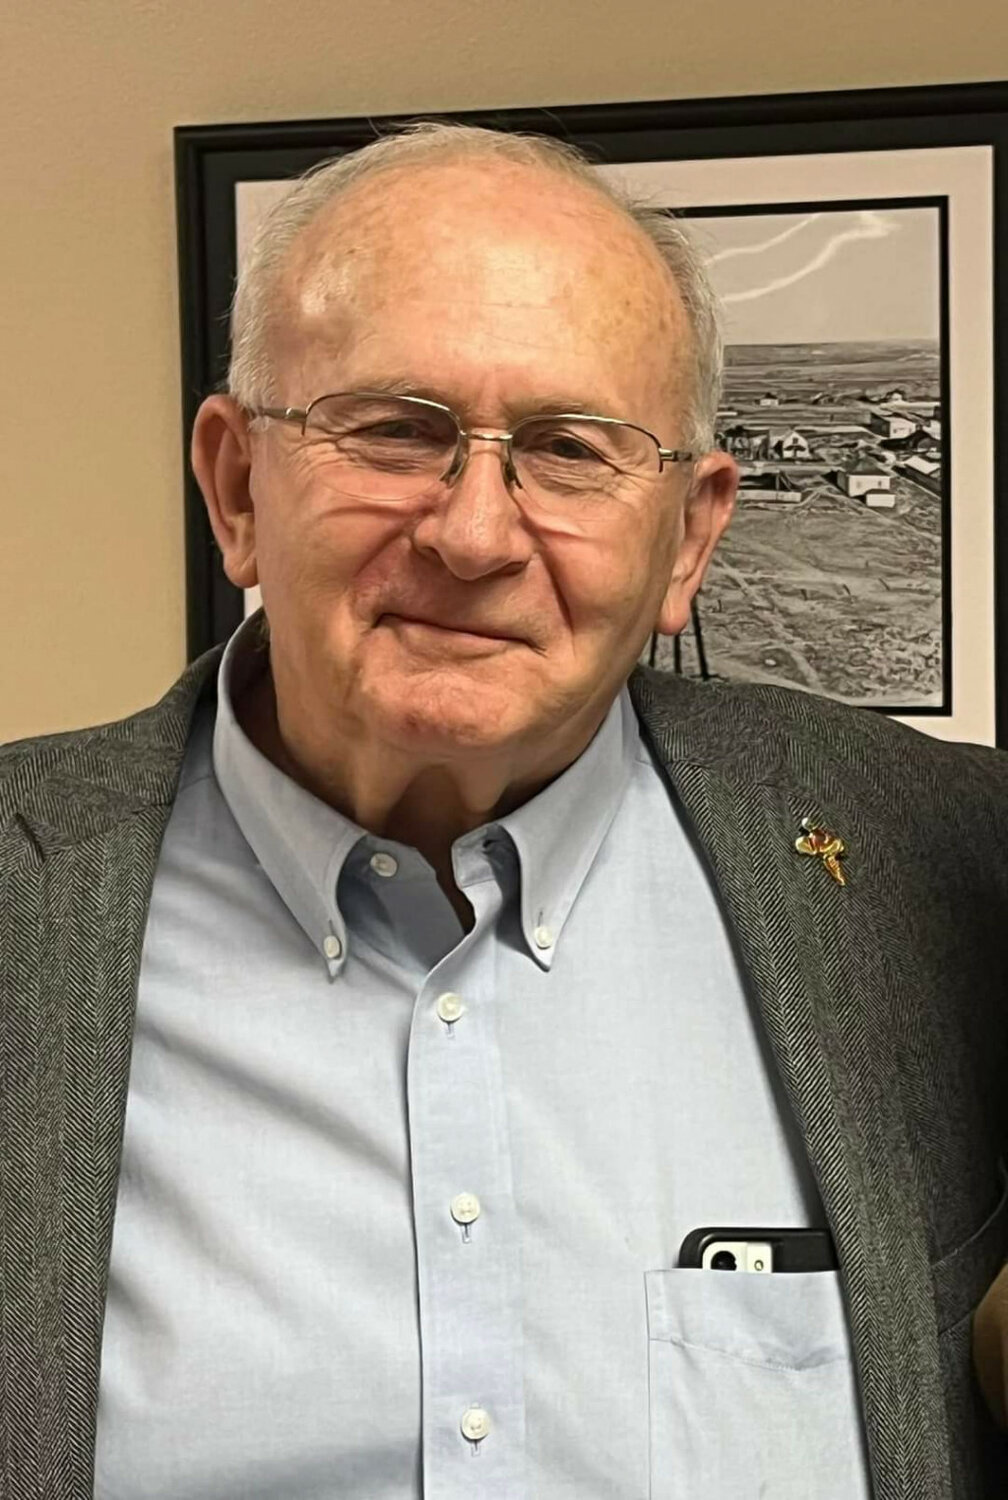 Courtesy/Randy Adams
The City of Torrington’s mayor, Randy Adams said, “I’m ready (for retirement), but I’m really going to miss the adventure, the unknown, the surprises that come in every day, all those kinds of things.”